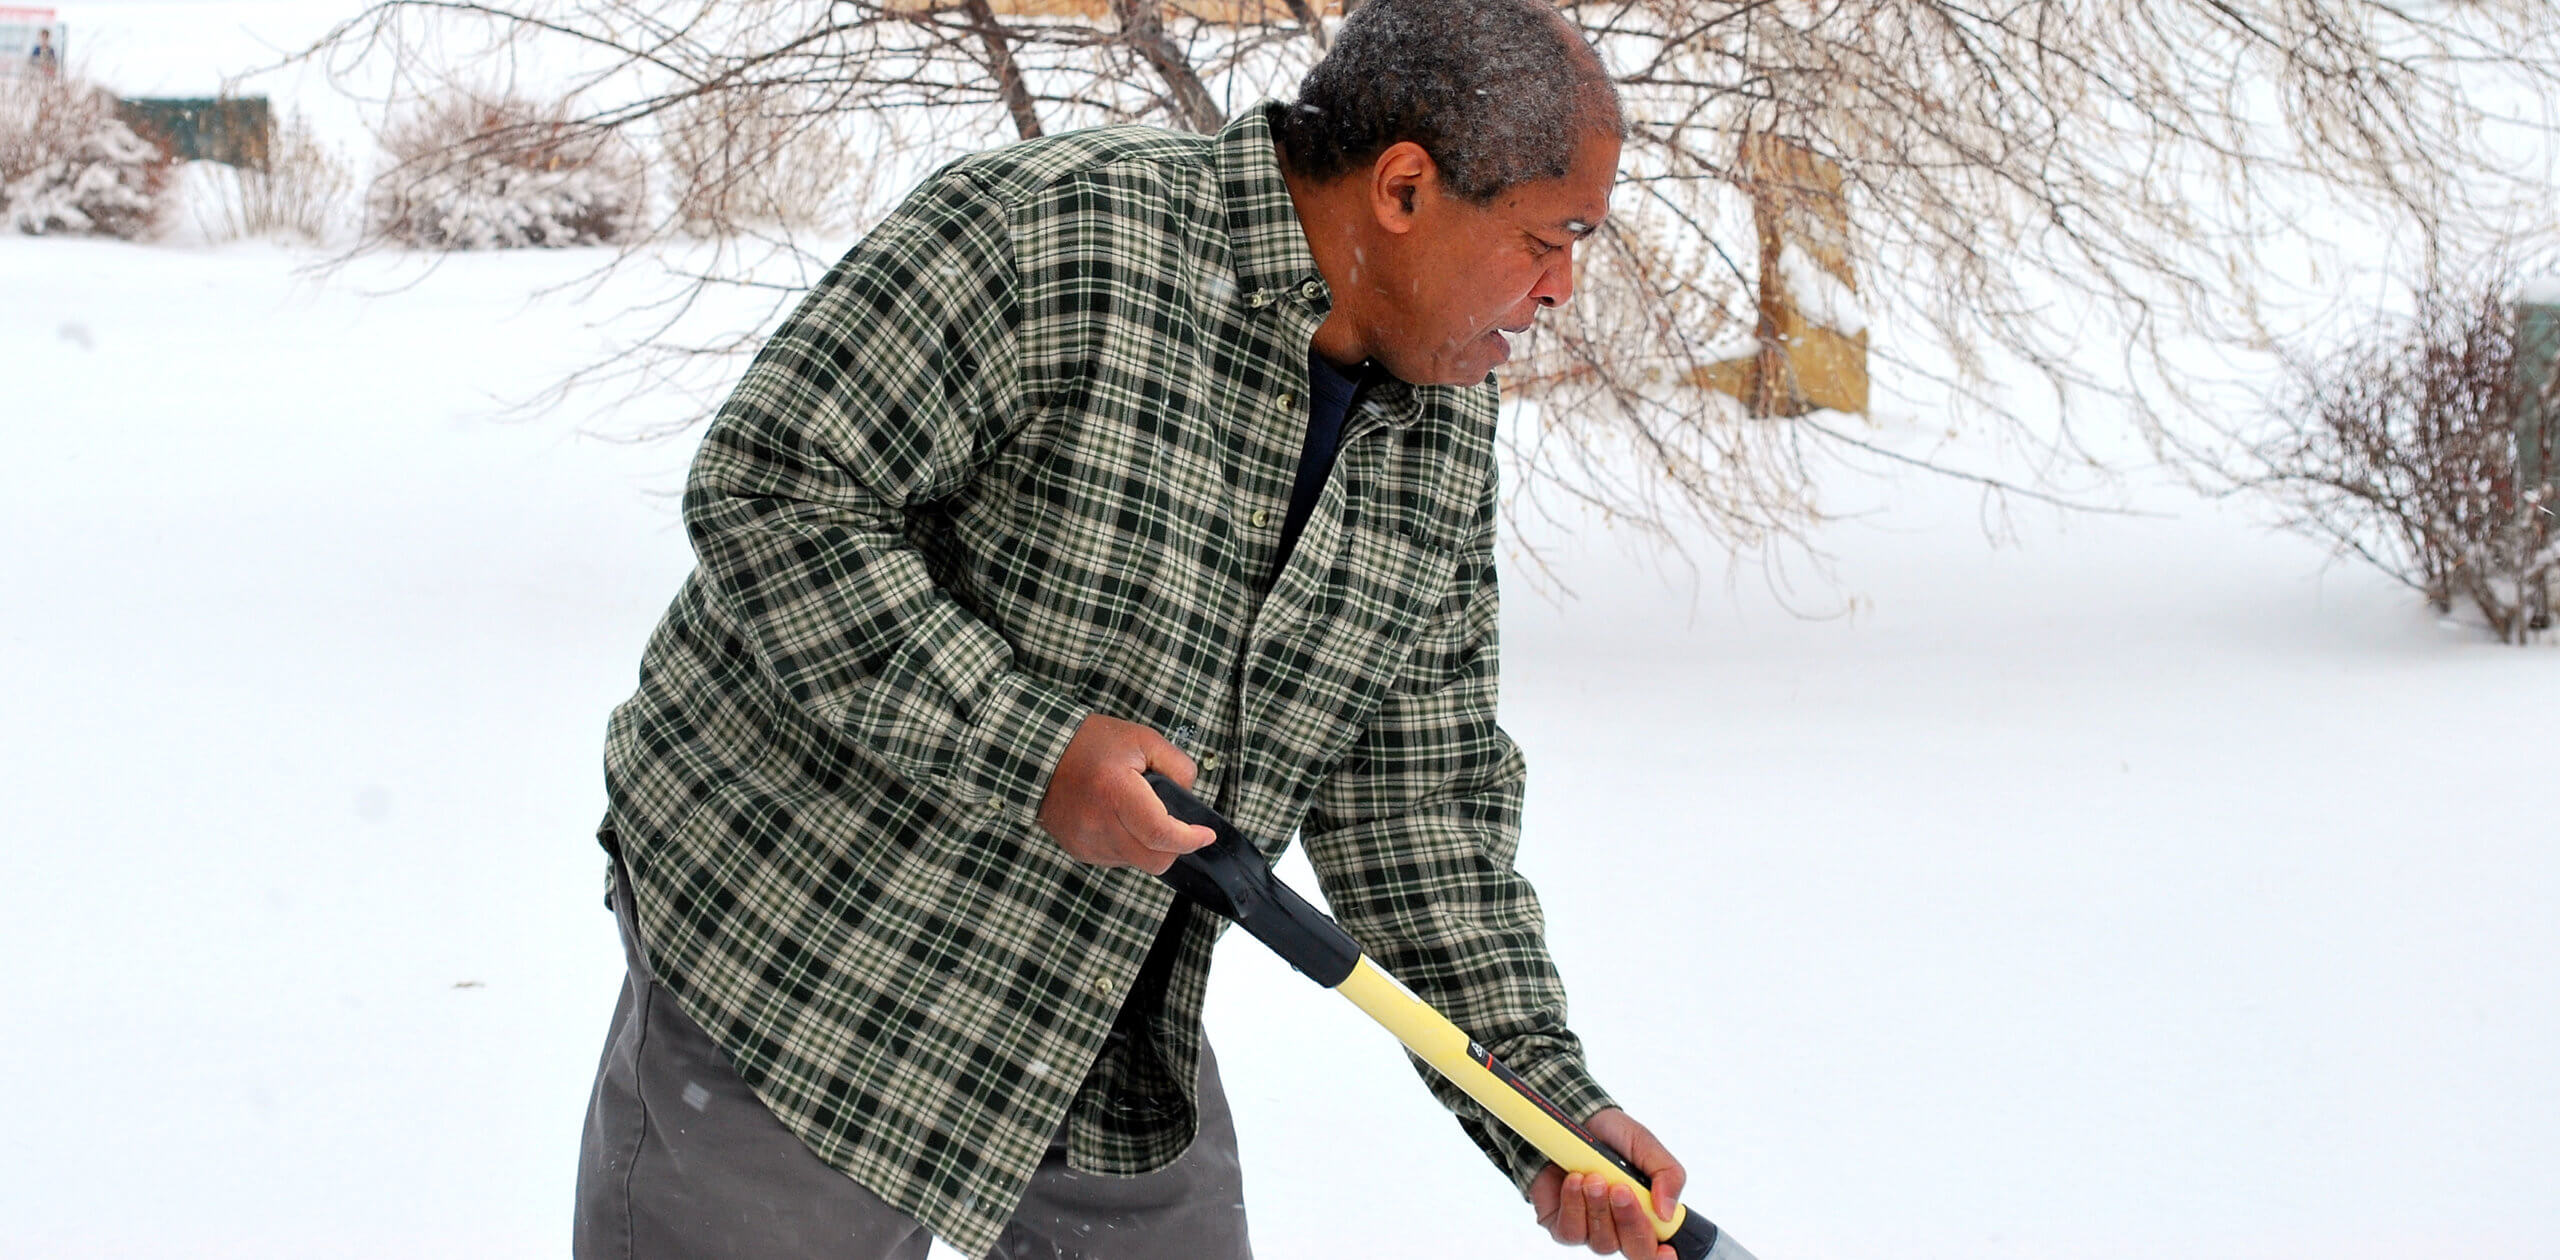 Black man in a plaid shirt clears his driveway after a snowstorm.